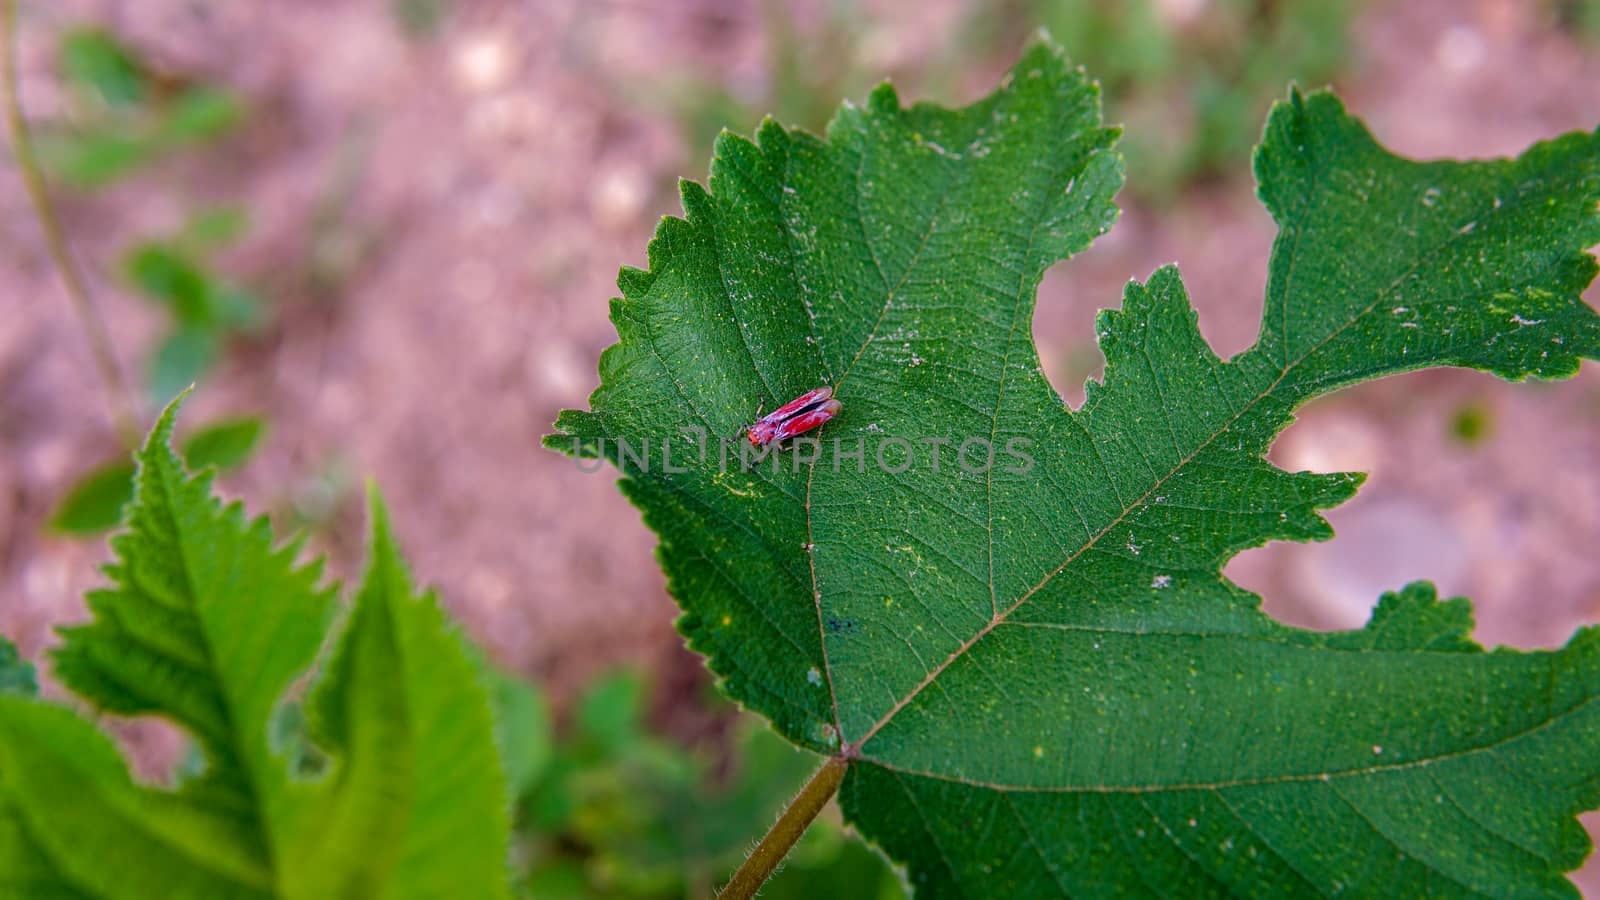 Red insect on a green leaf in the garden by sonandonures